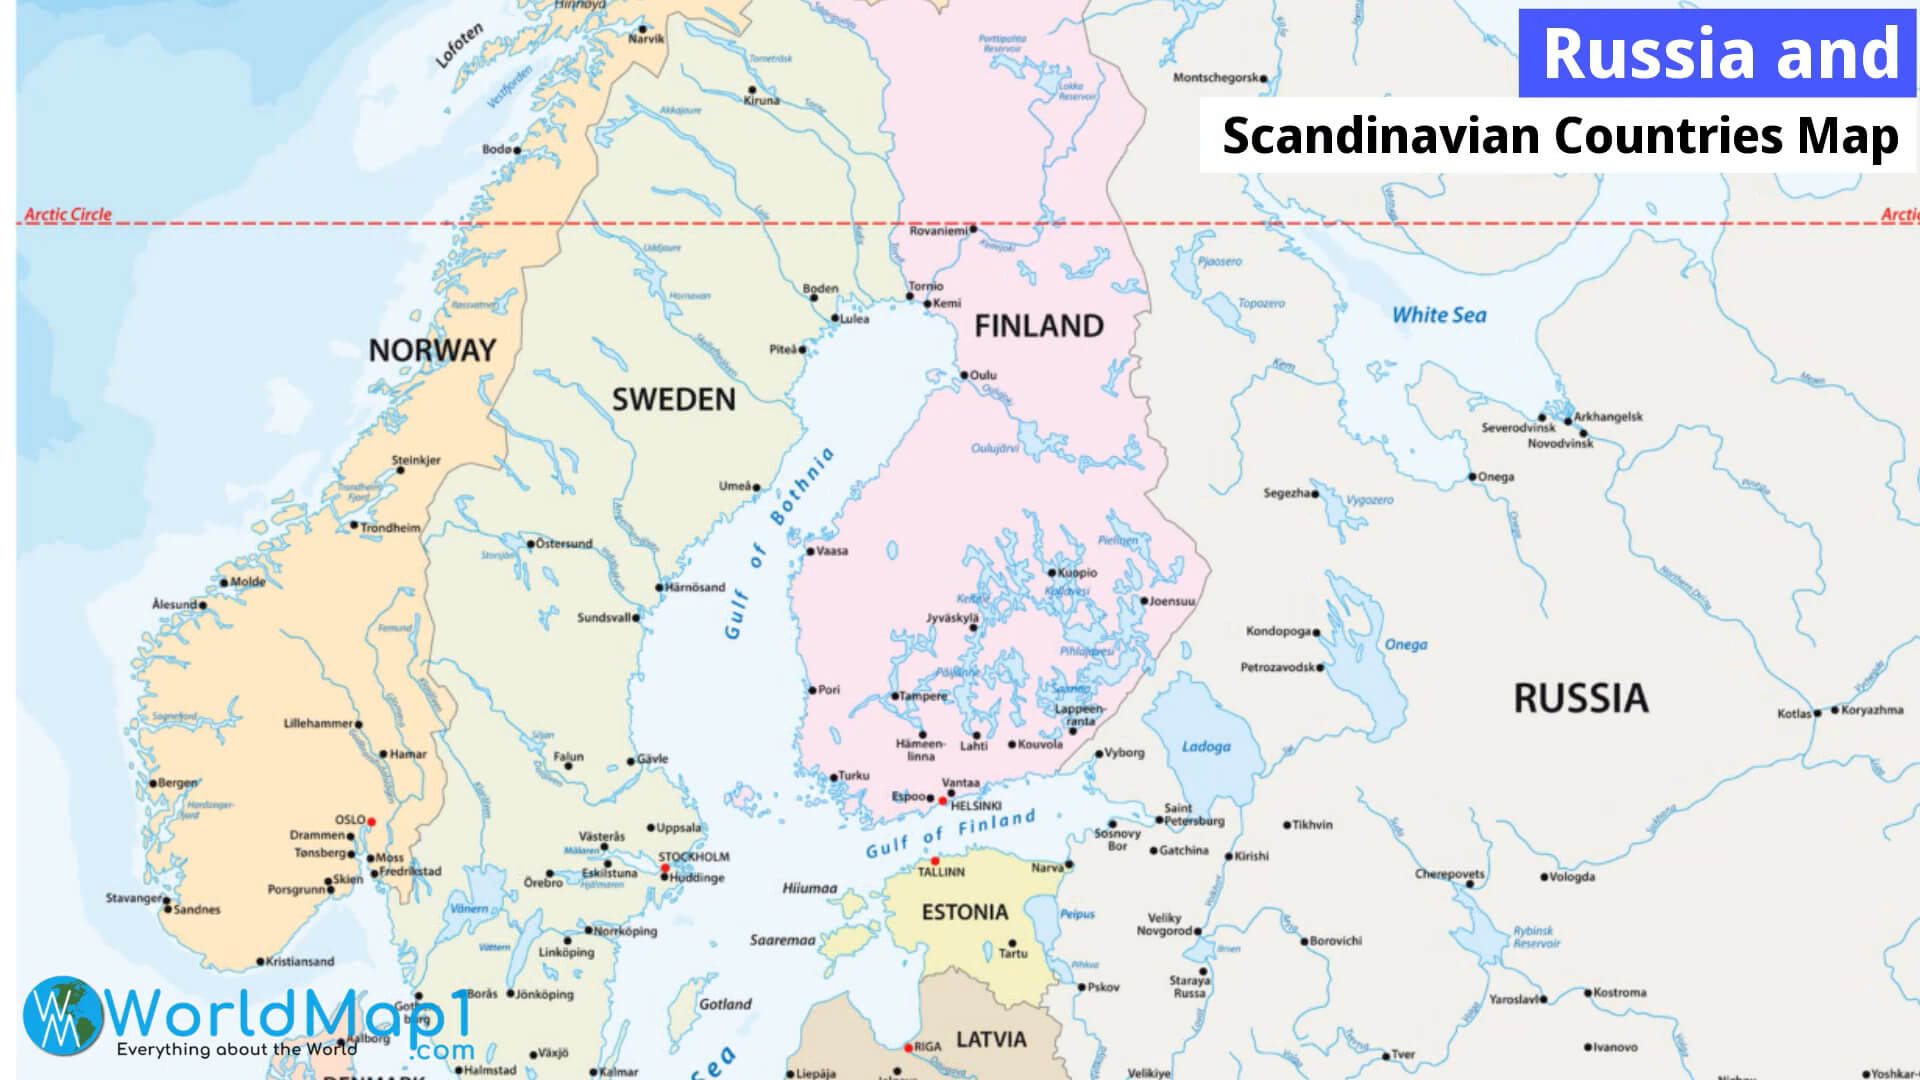 Russia and Scandinavian Countries Map